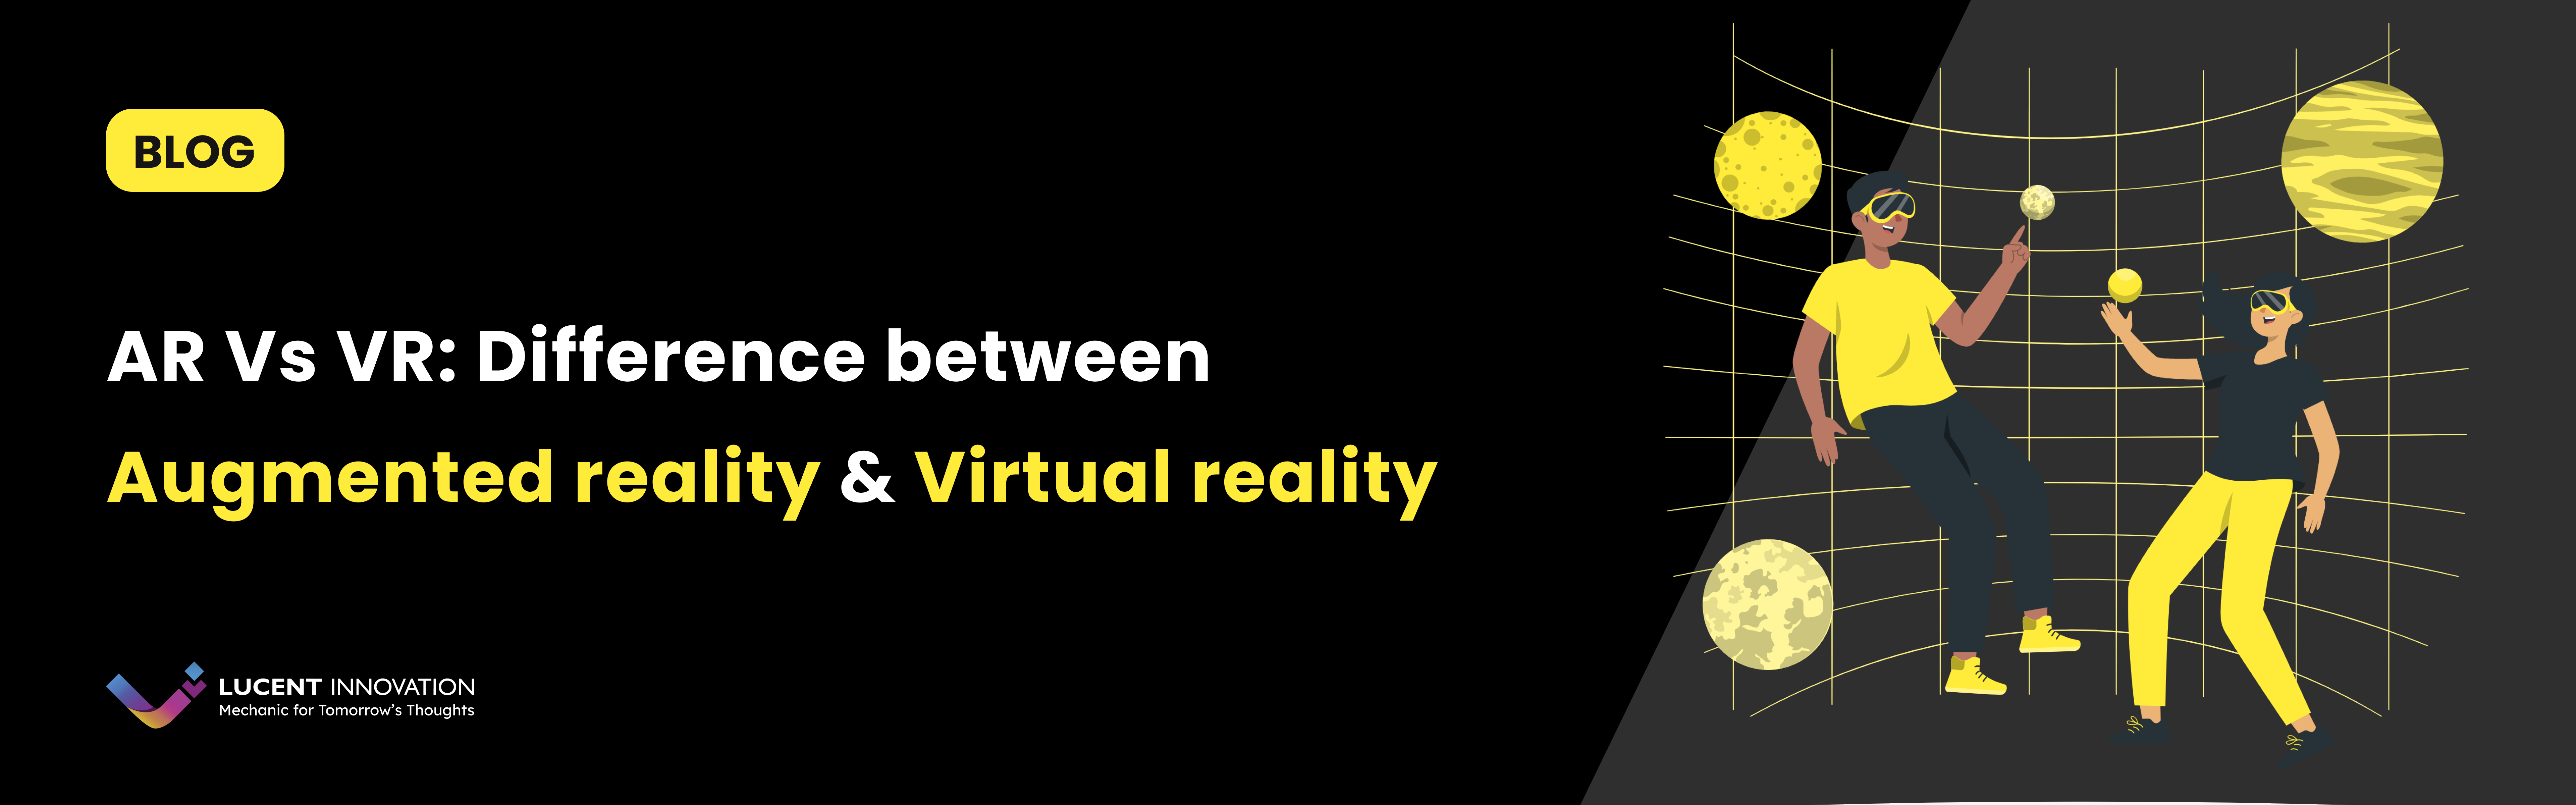 AR Vs VR: Difference between Augmented reality & Virtual reality